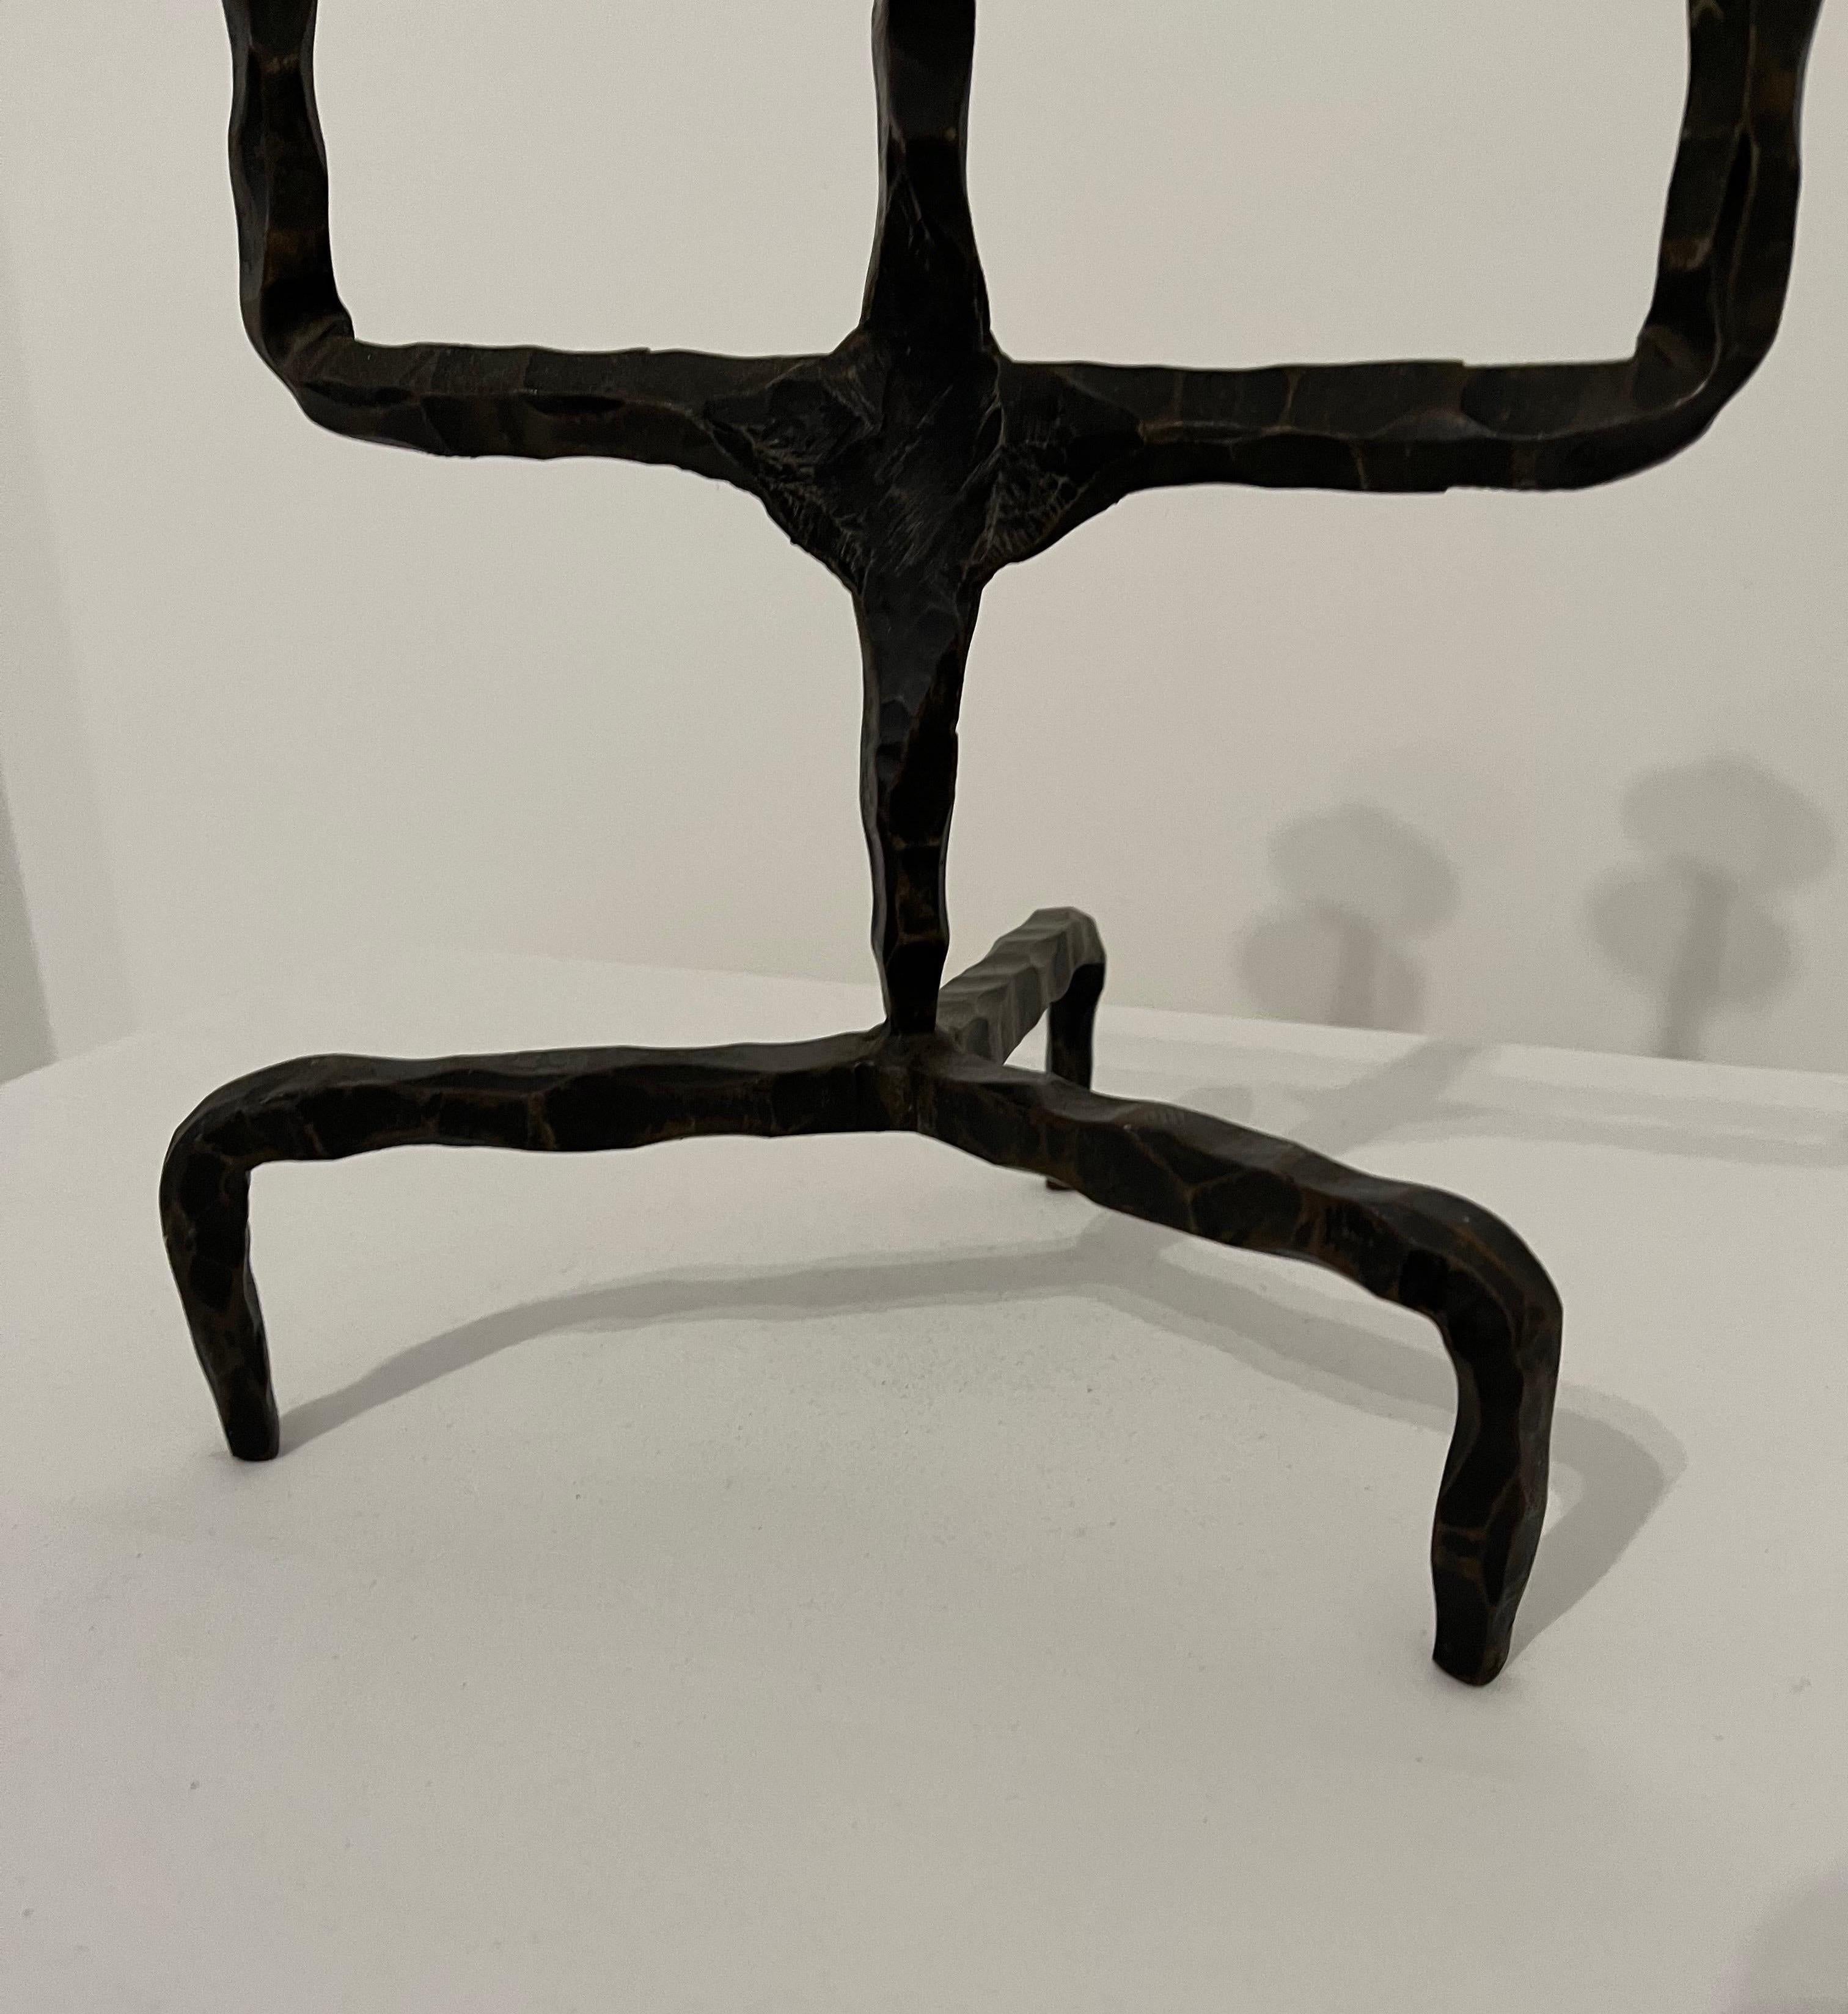 Brutalist French Iron candelabra candlestick - after Marolles c1950s For Sale 1